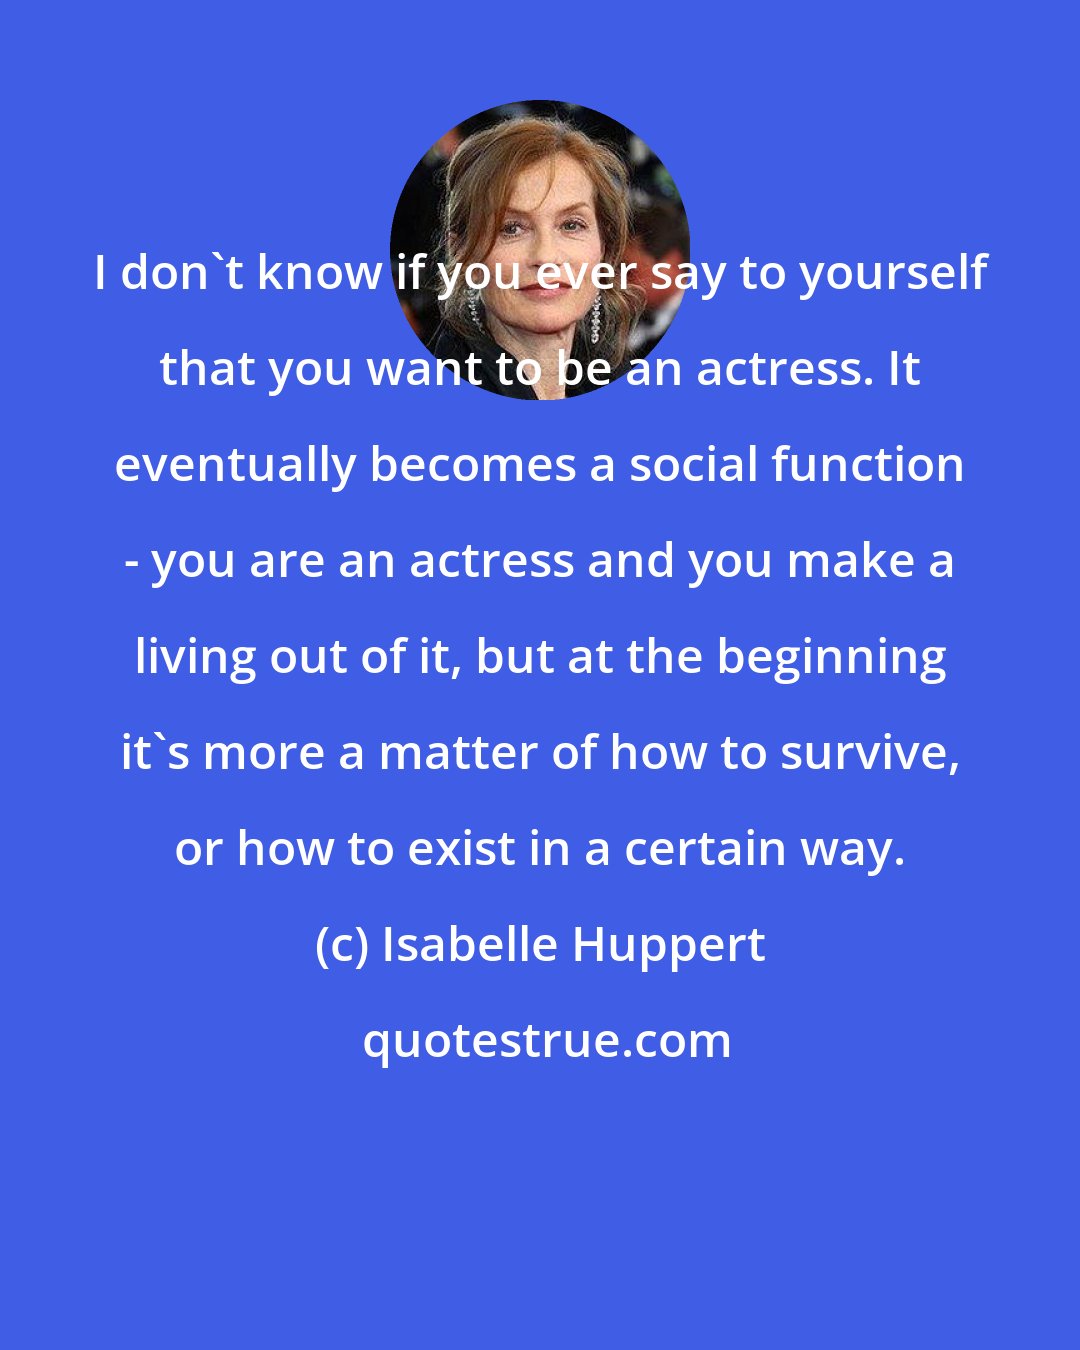 Isabelle Huppert: I don't know if you ever say to yourself that you want to be an actress. It eventually becomes a social function - you are an actress and you make a living out of it, but at the beginning it's more a matter of how to survive, or how to exist in a certain way.